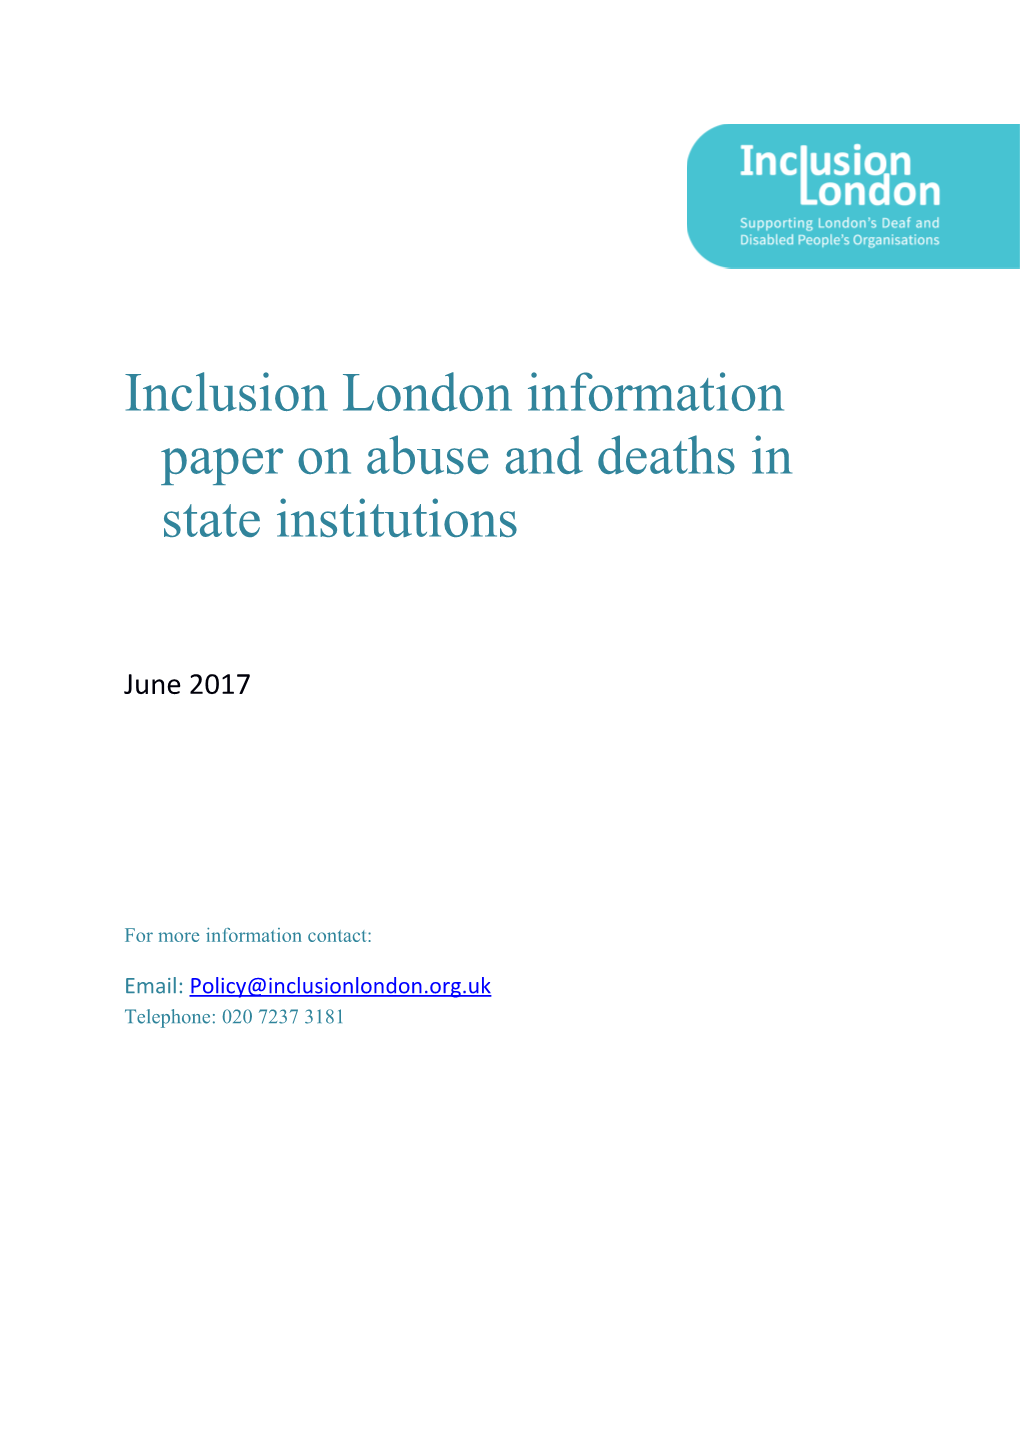 Inclusion London Information Paper on Abuse and Deaths in State Institutions